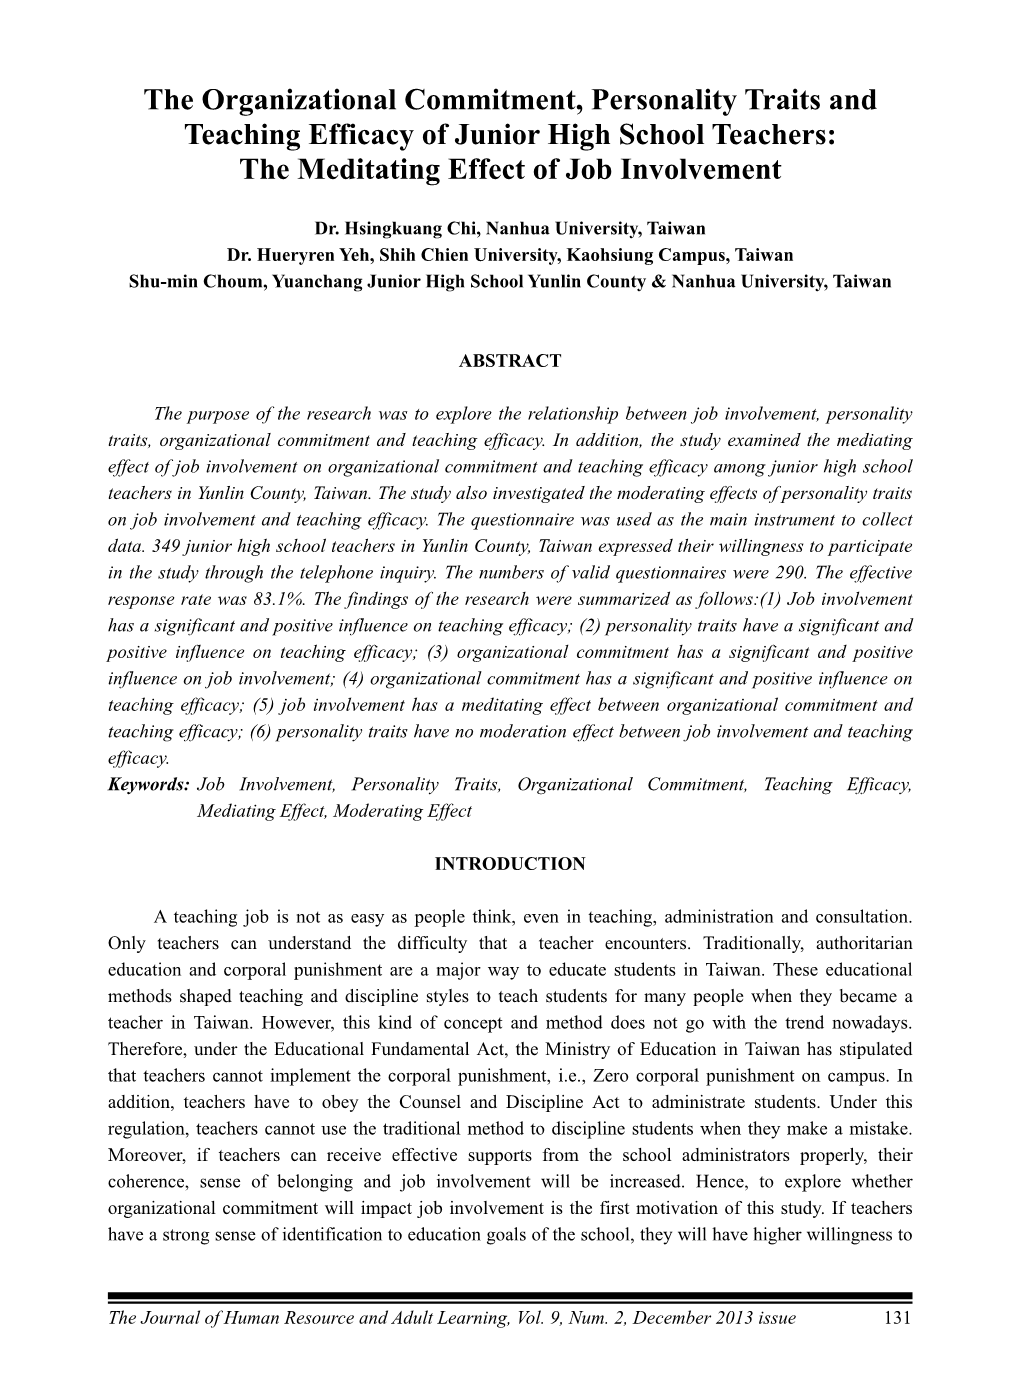 The Organizational Commitment, Personality Traits and Teaching Efficacy of Junior High School Teachers: the Meditating Effect of Job Involvement